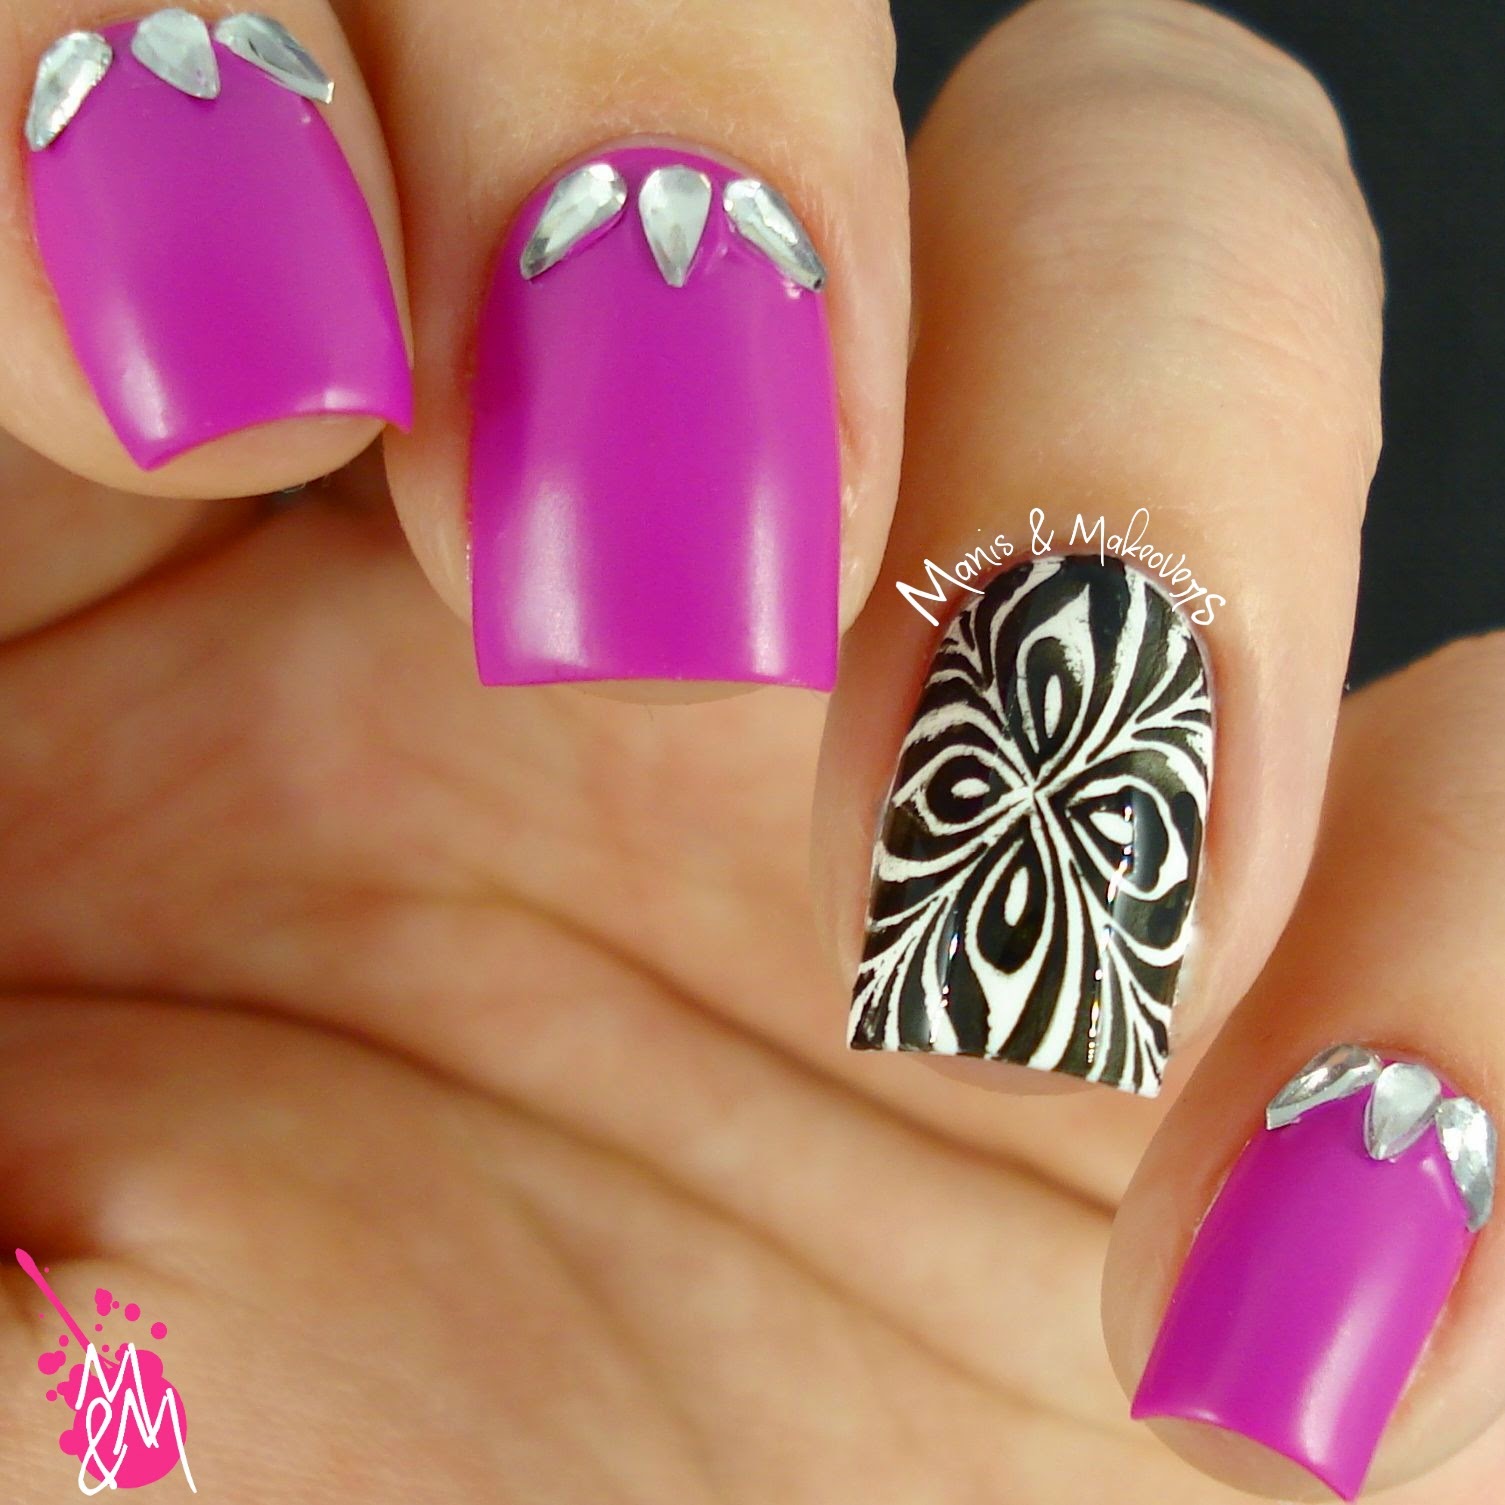 Manis & Makeovers: Neon with a touch of black 'n white